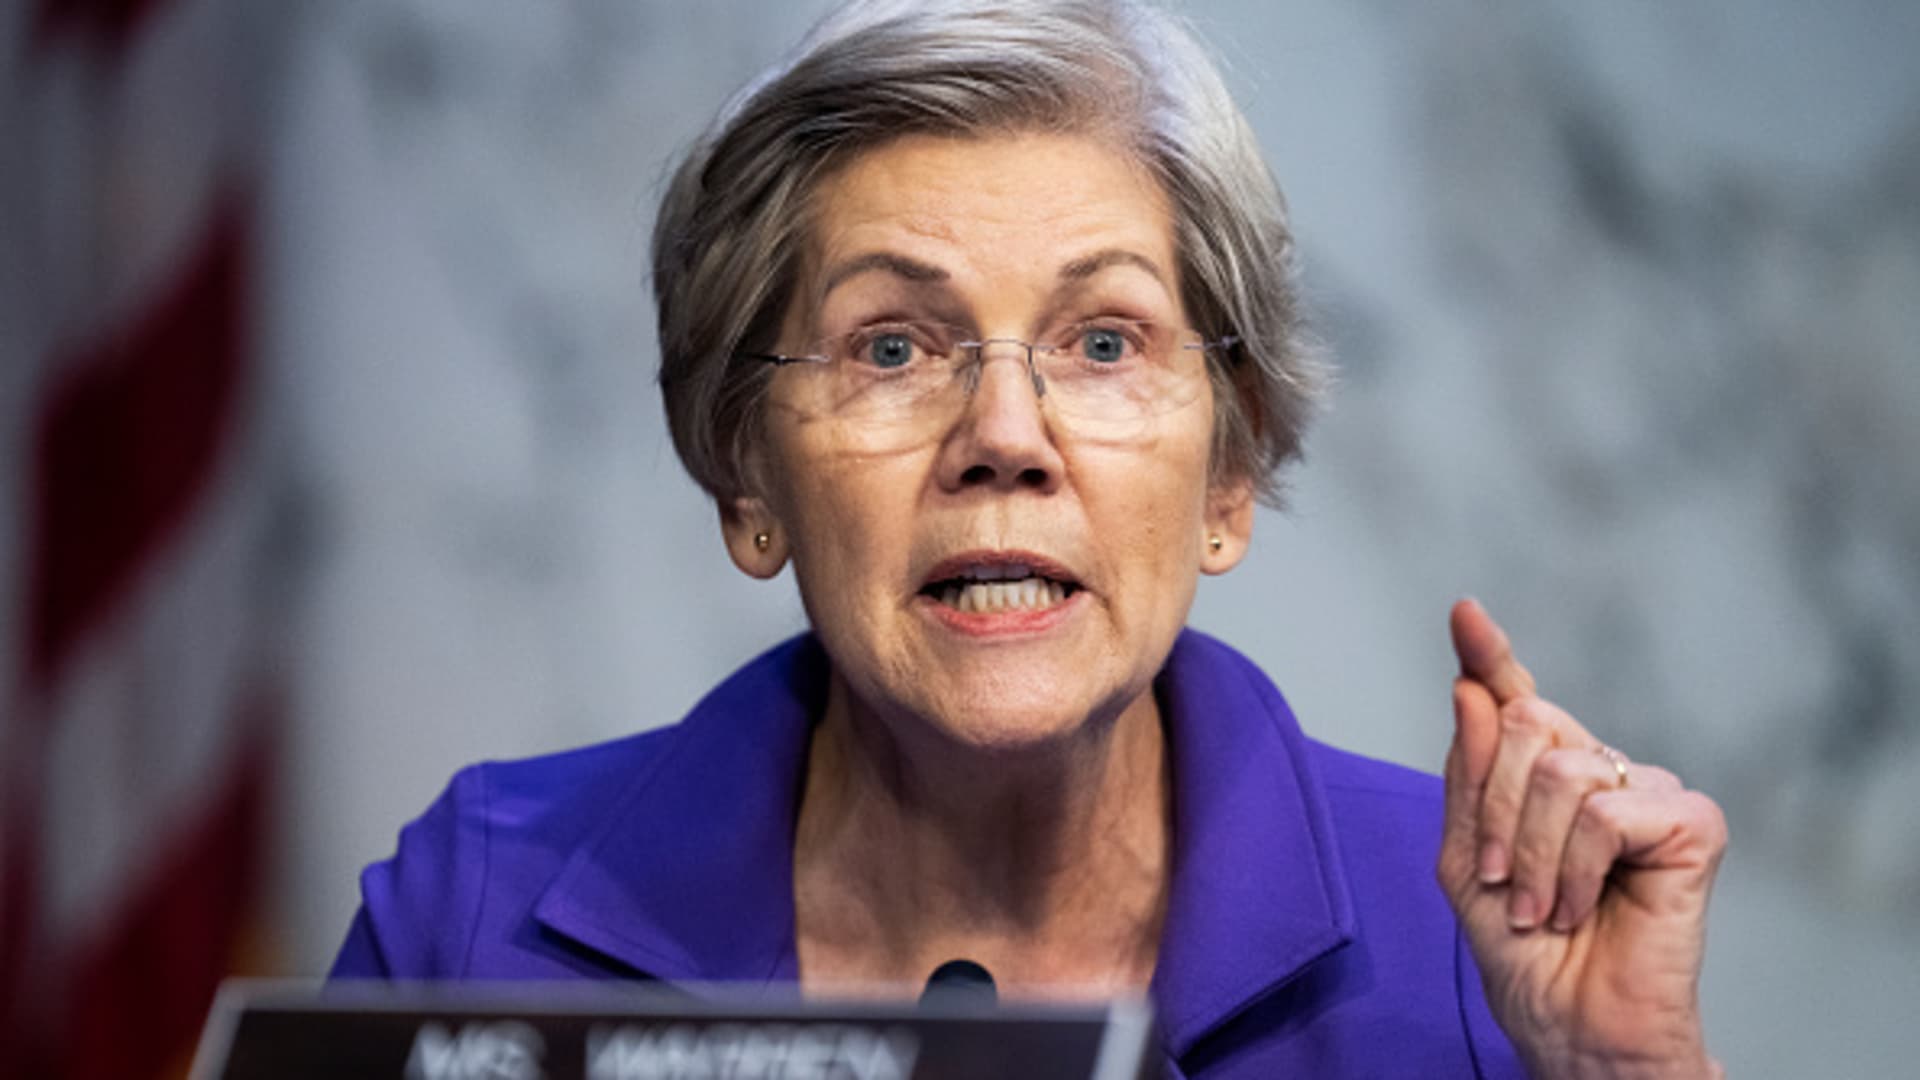 Sen. Warren urges Fed Chair Powell to recuse himself from review of Silicon Valley Bank collapse